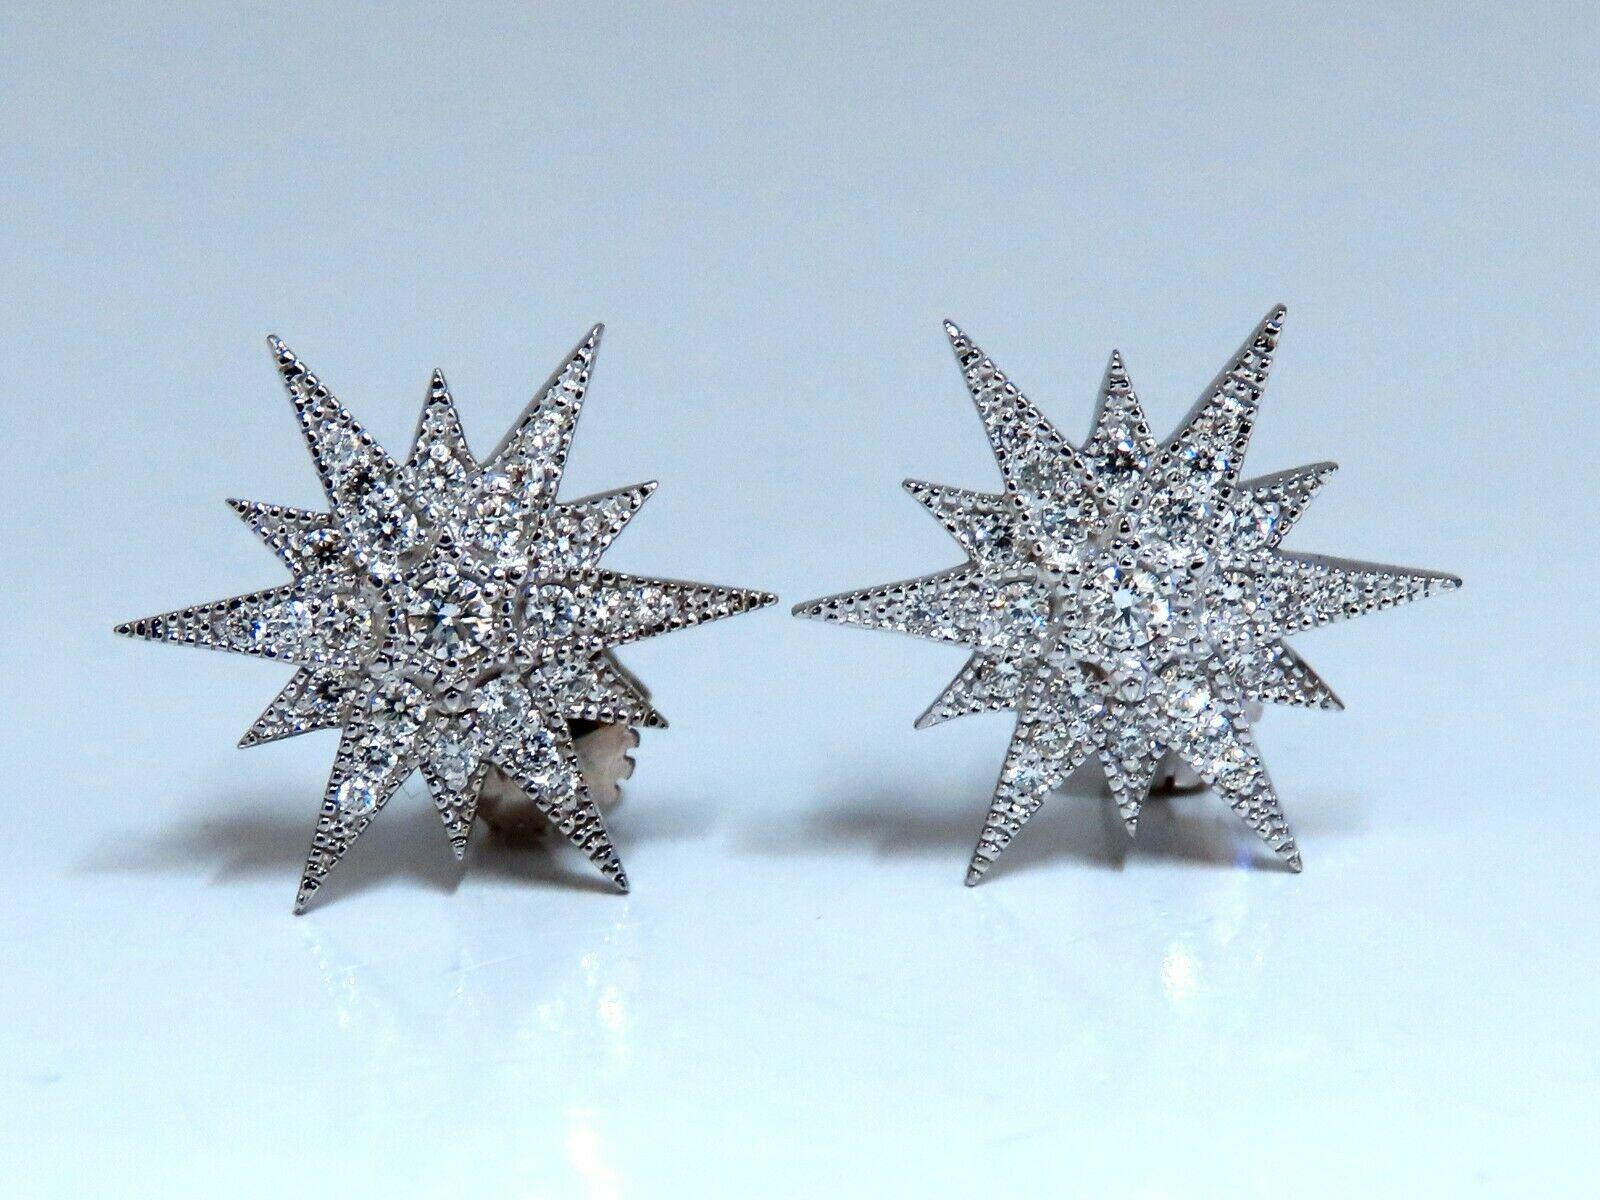 Snow Flake North Star Compass Earrings.

.52cts of natural round diamonds: 

G-color, Vs-2  clarity.

14kt. white gold

3.8 grams.

Earrings measure: .70 inch Diameter

Comfortable Butterfly

$4,000 Appraisal Certificate to accompany

